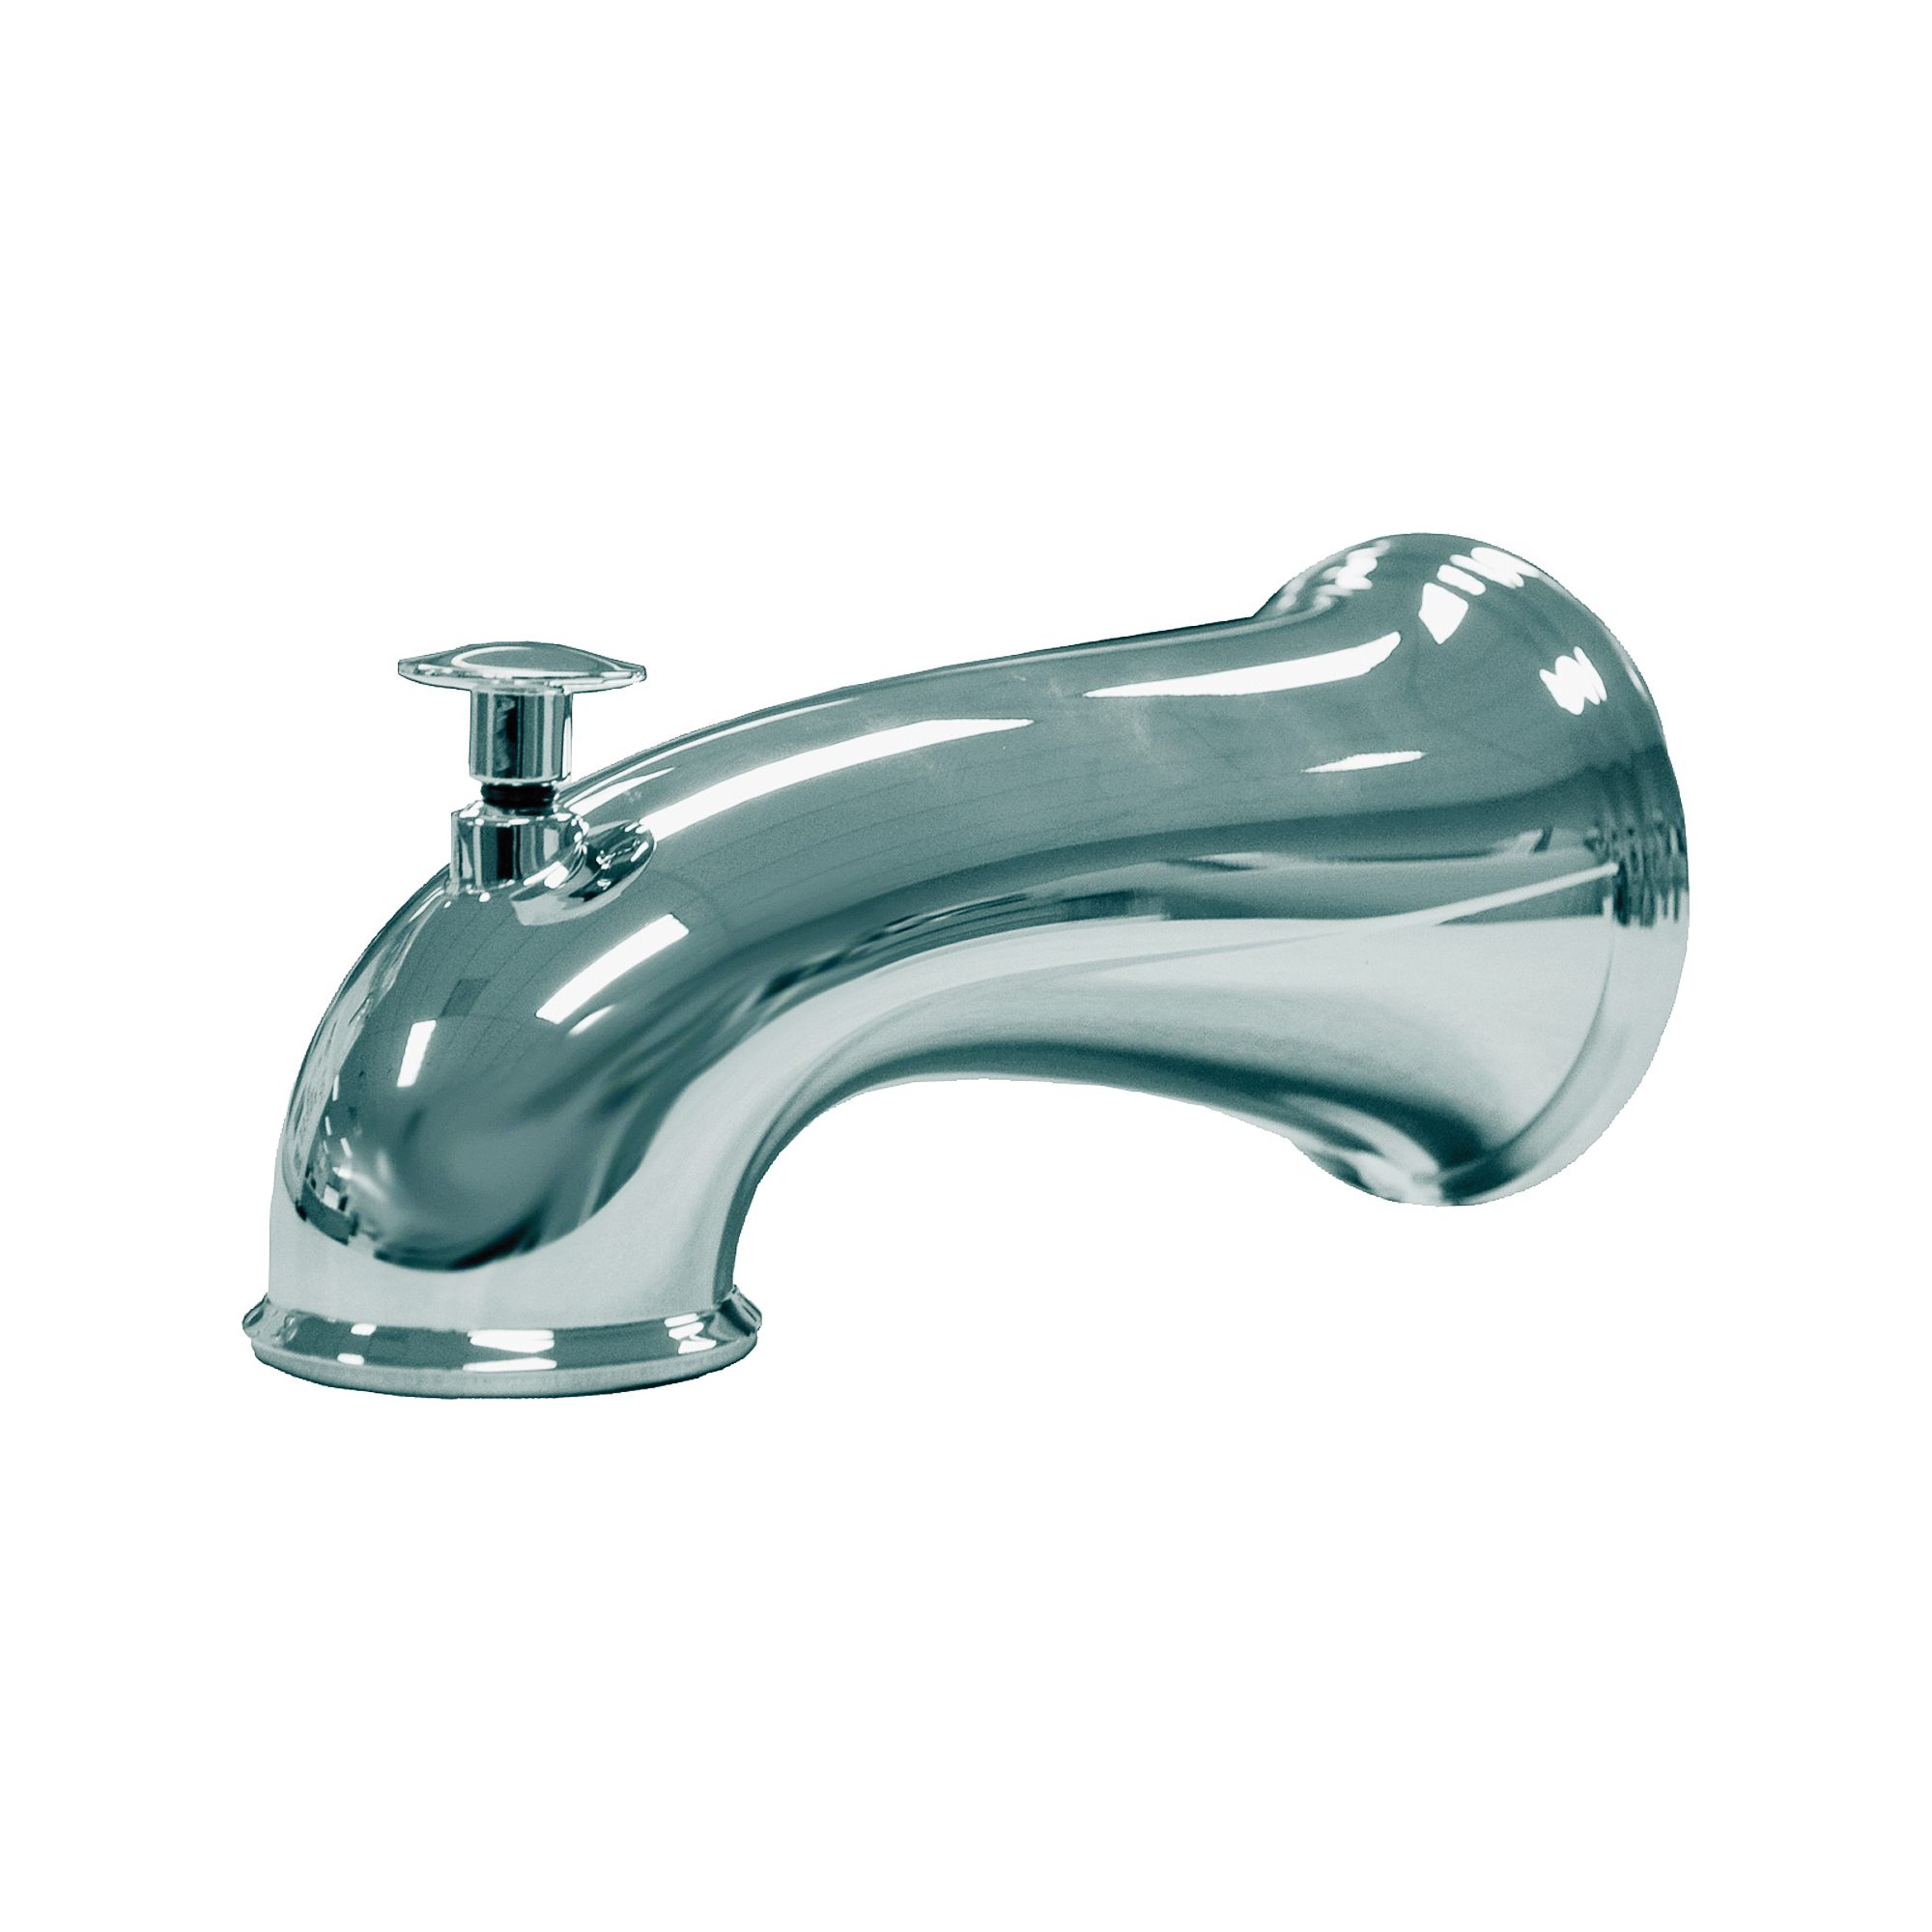 Danco 10315 Tub Spout, 6 in L, Metal, Chrome Plated - 1